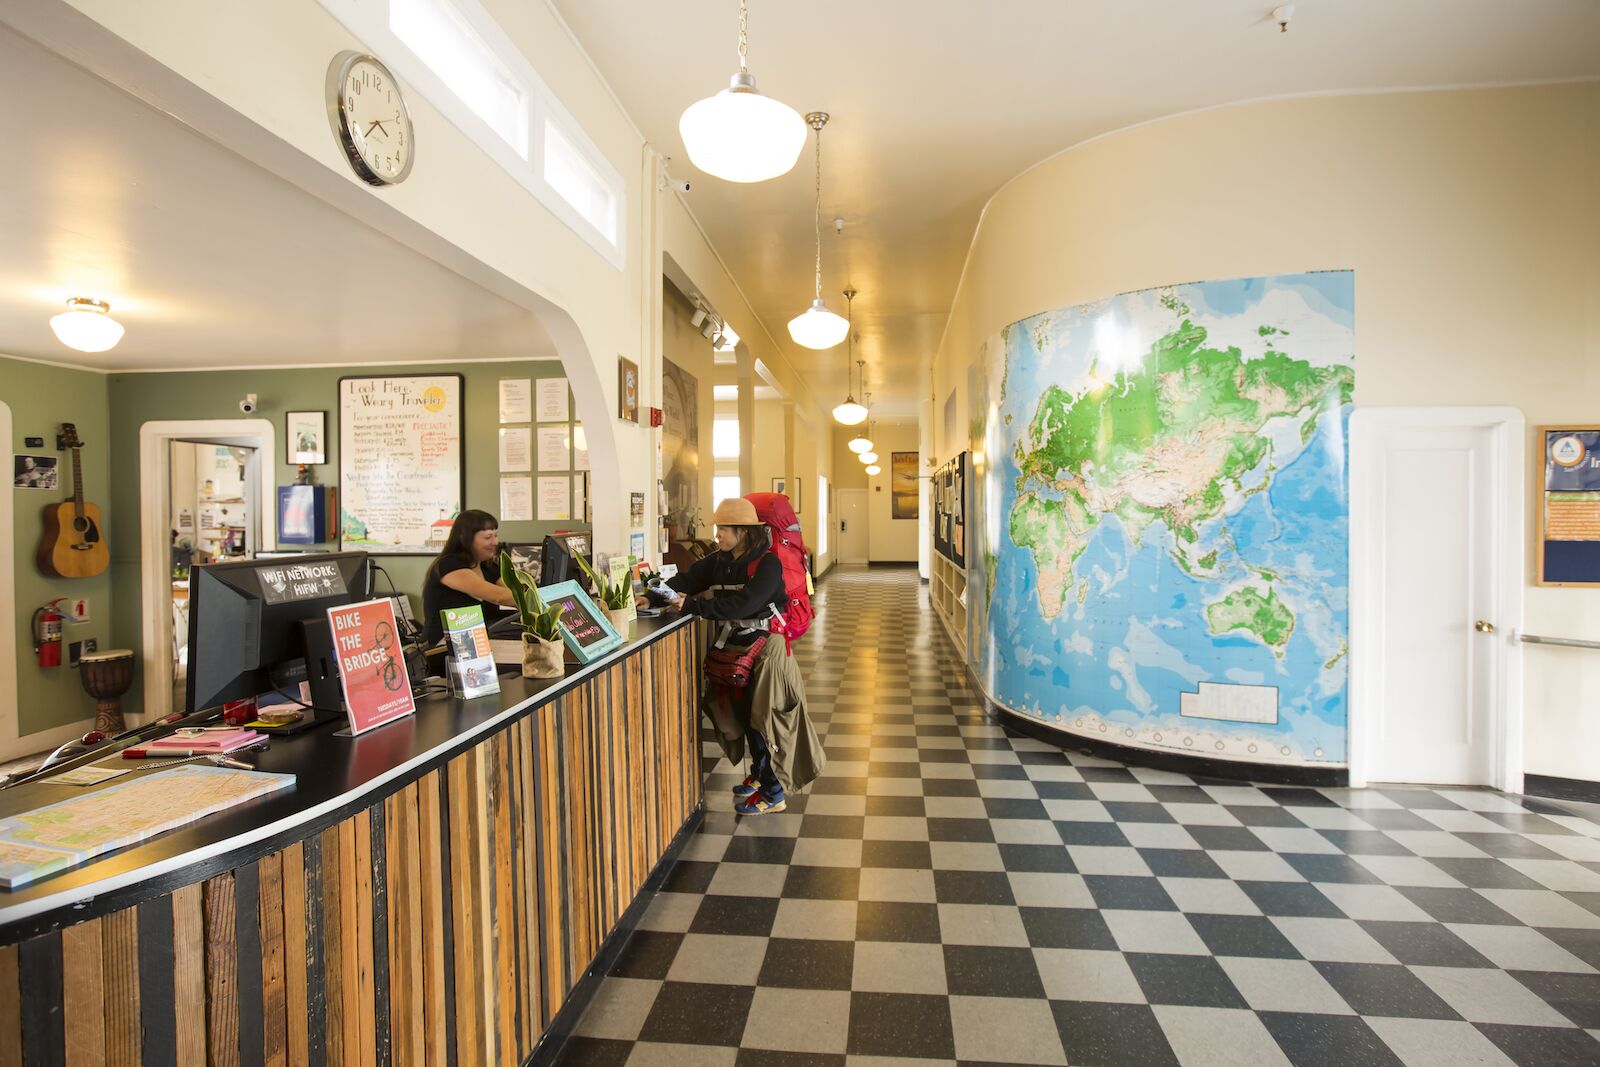 Lobby of the hostel Fisherman's Wharf in San Francisco. One of many repurposed buildings turned into hostels.